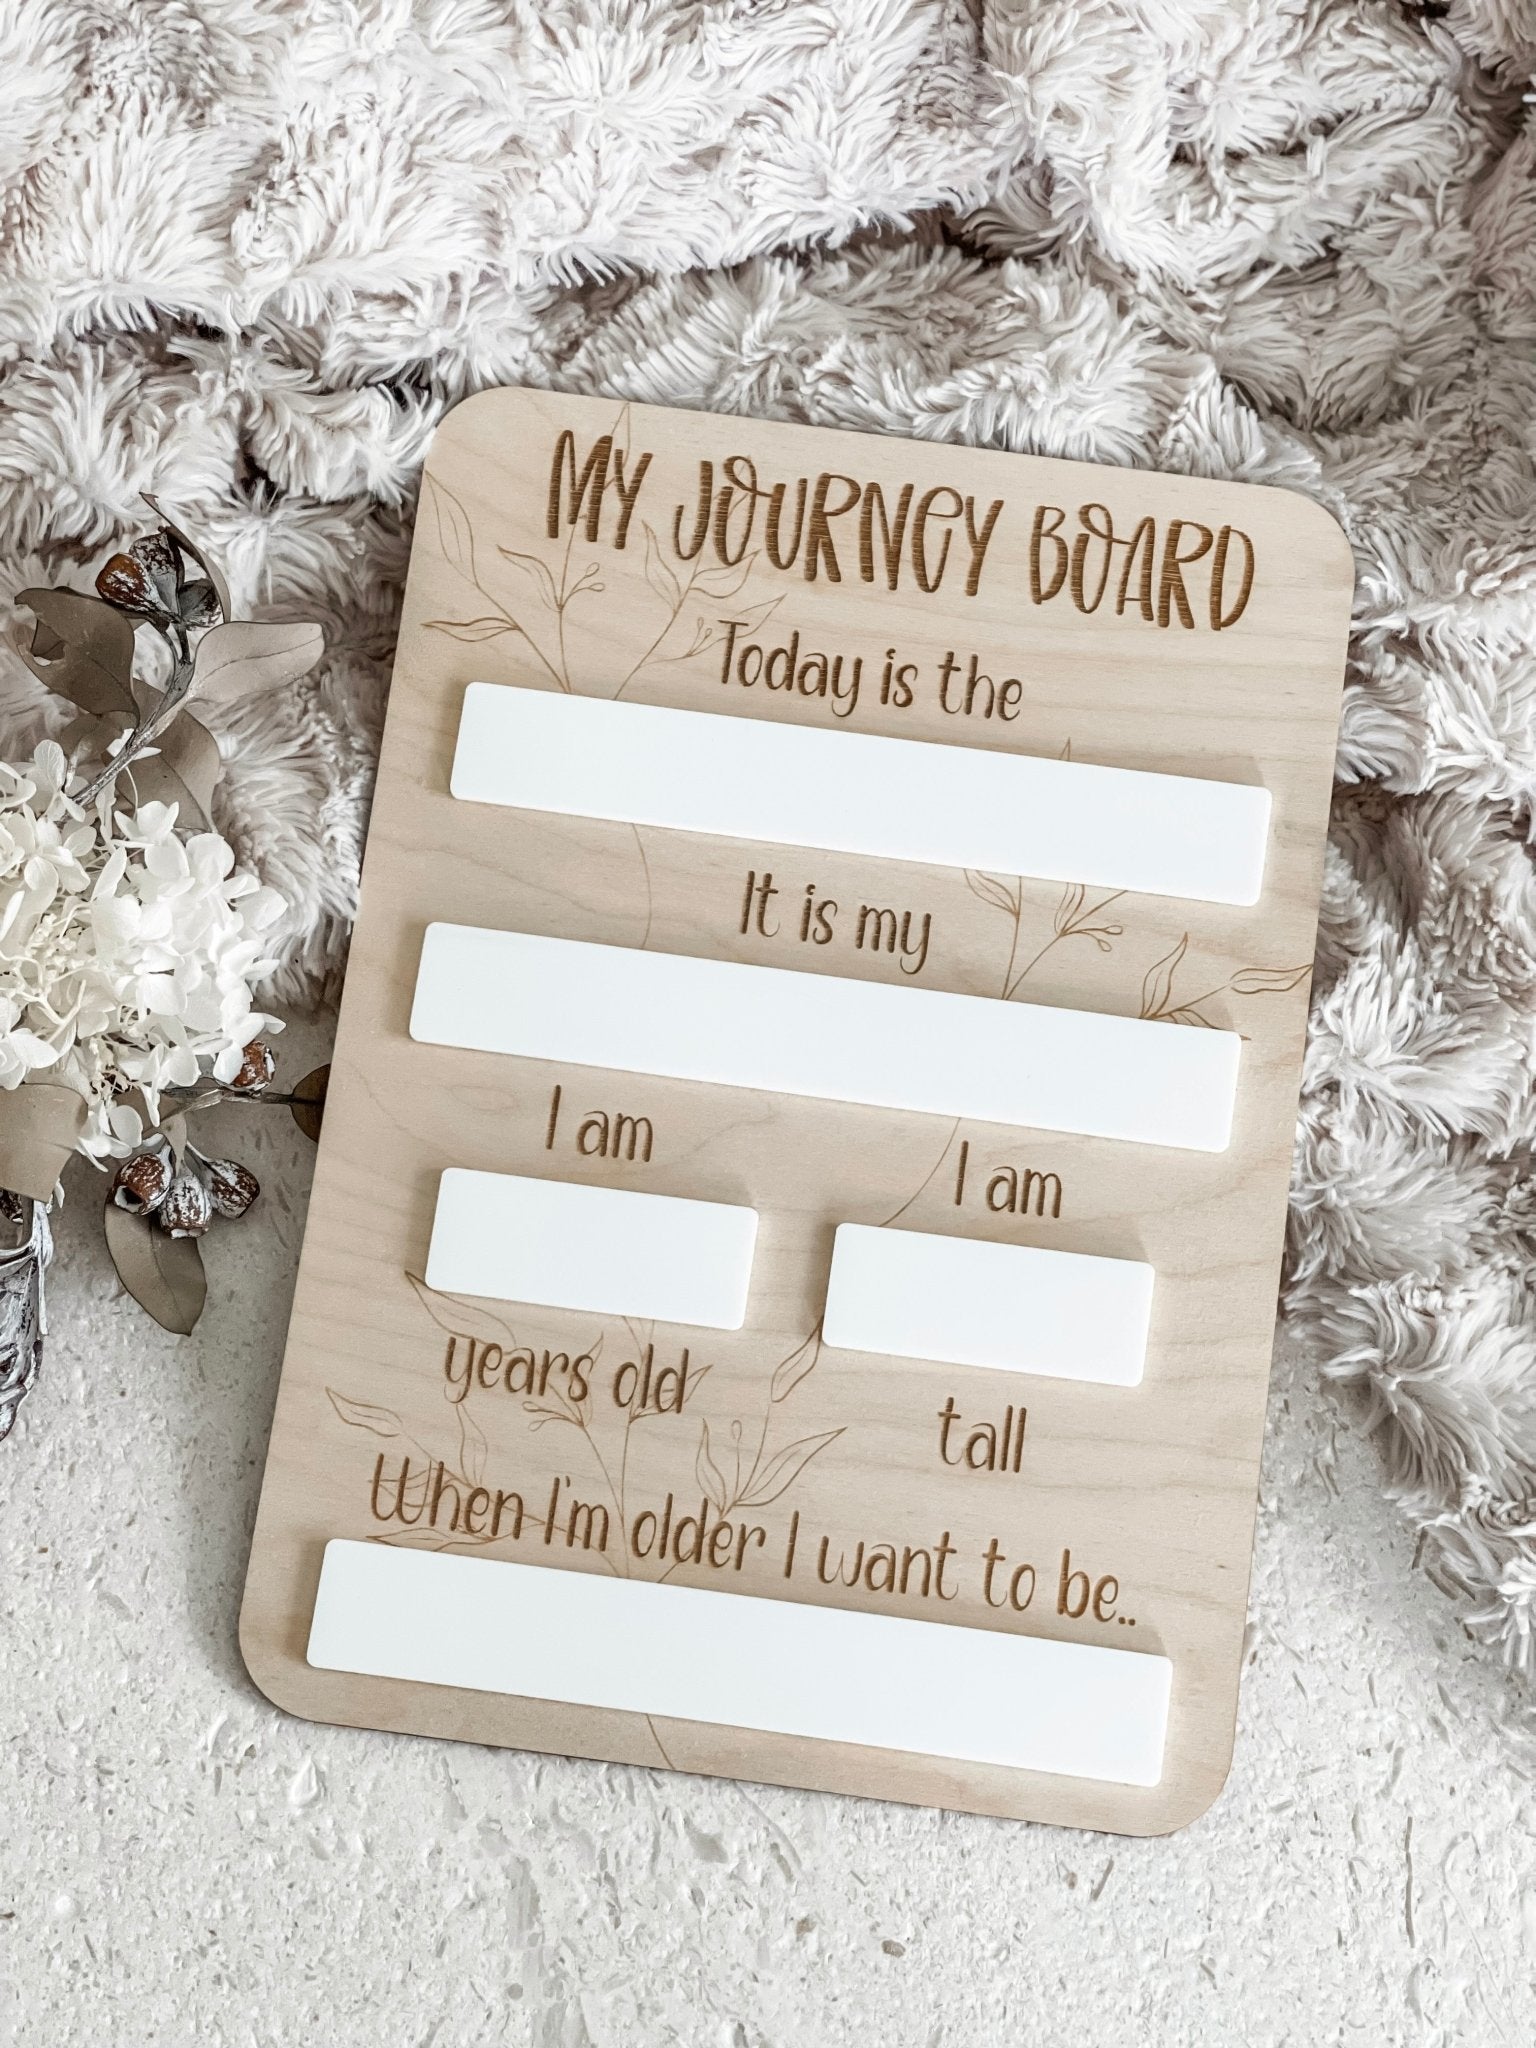 My Journey Board - The Humble Gift Co.